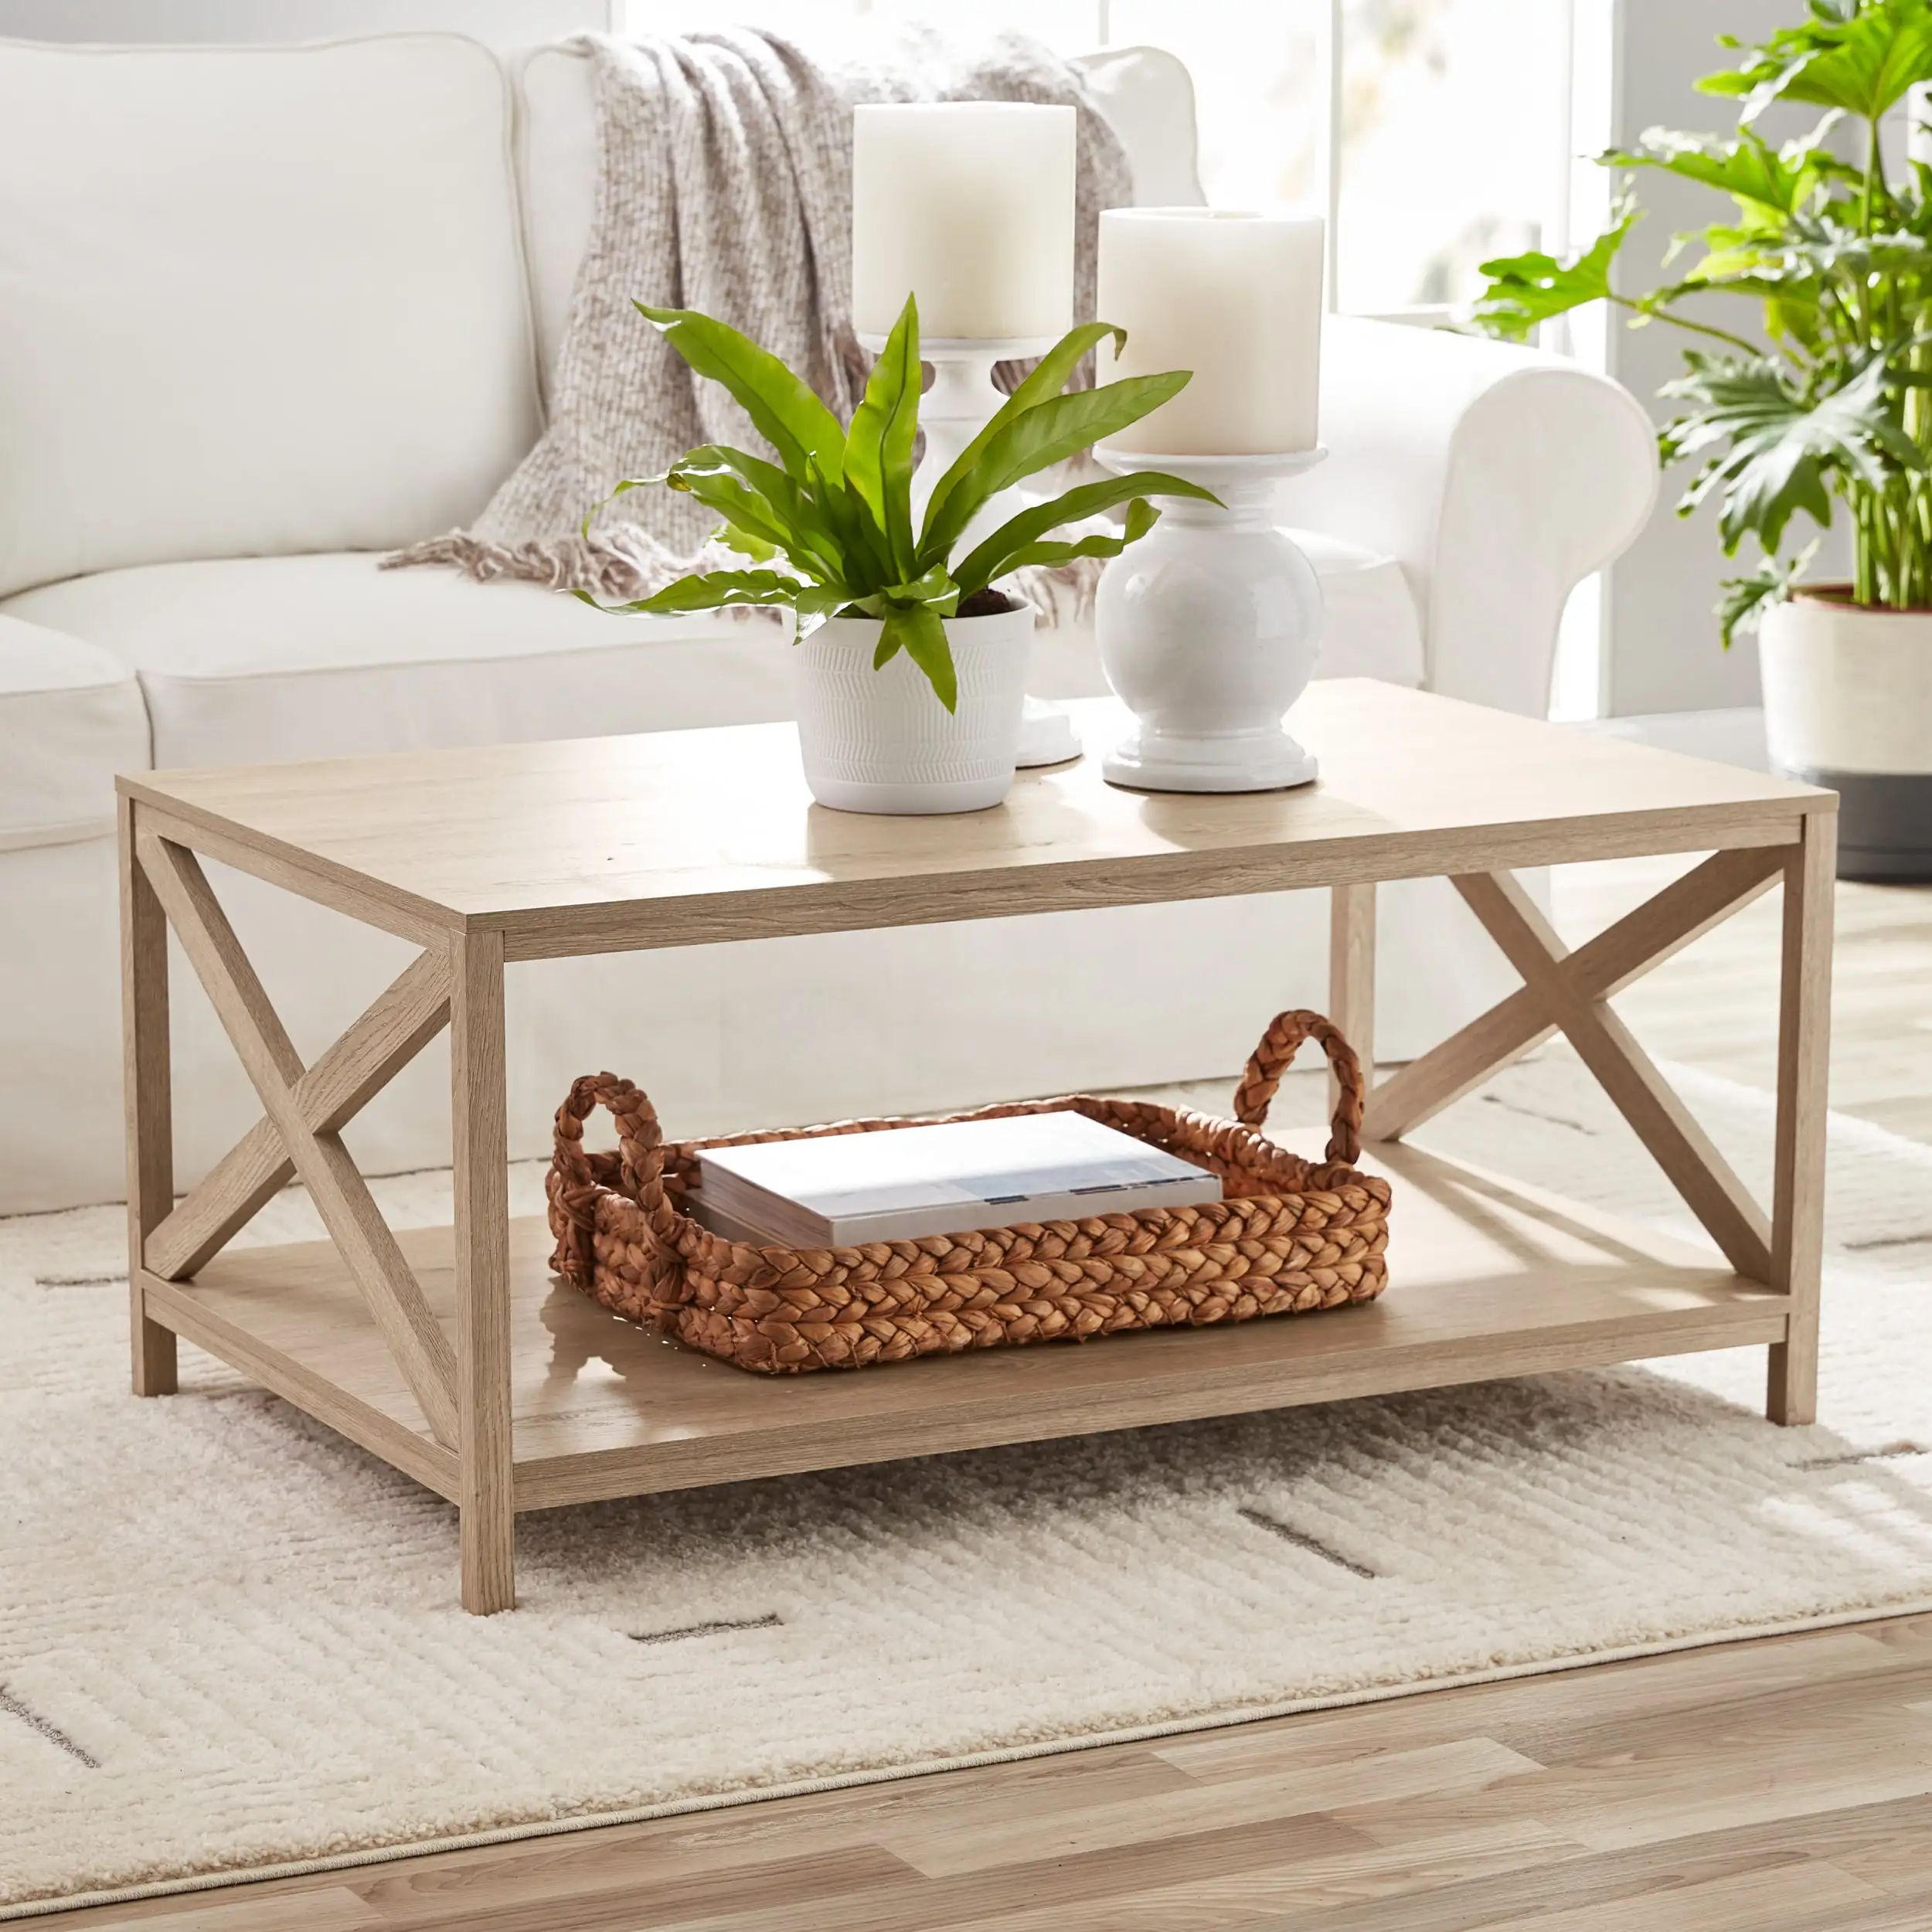 Farmhouse X Design Rectangle Coffee Table, Rustic Gray,furniture, Living  Room Furniture, Simple And Modern Coffee Table, Wooden – Aliexpress Intended For Modern Wooden X Design Coffee Tables (View 15 of 15)